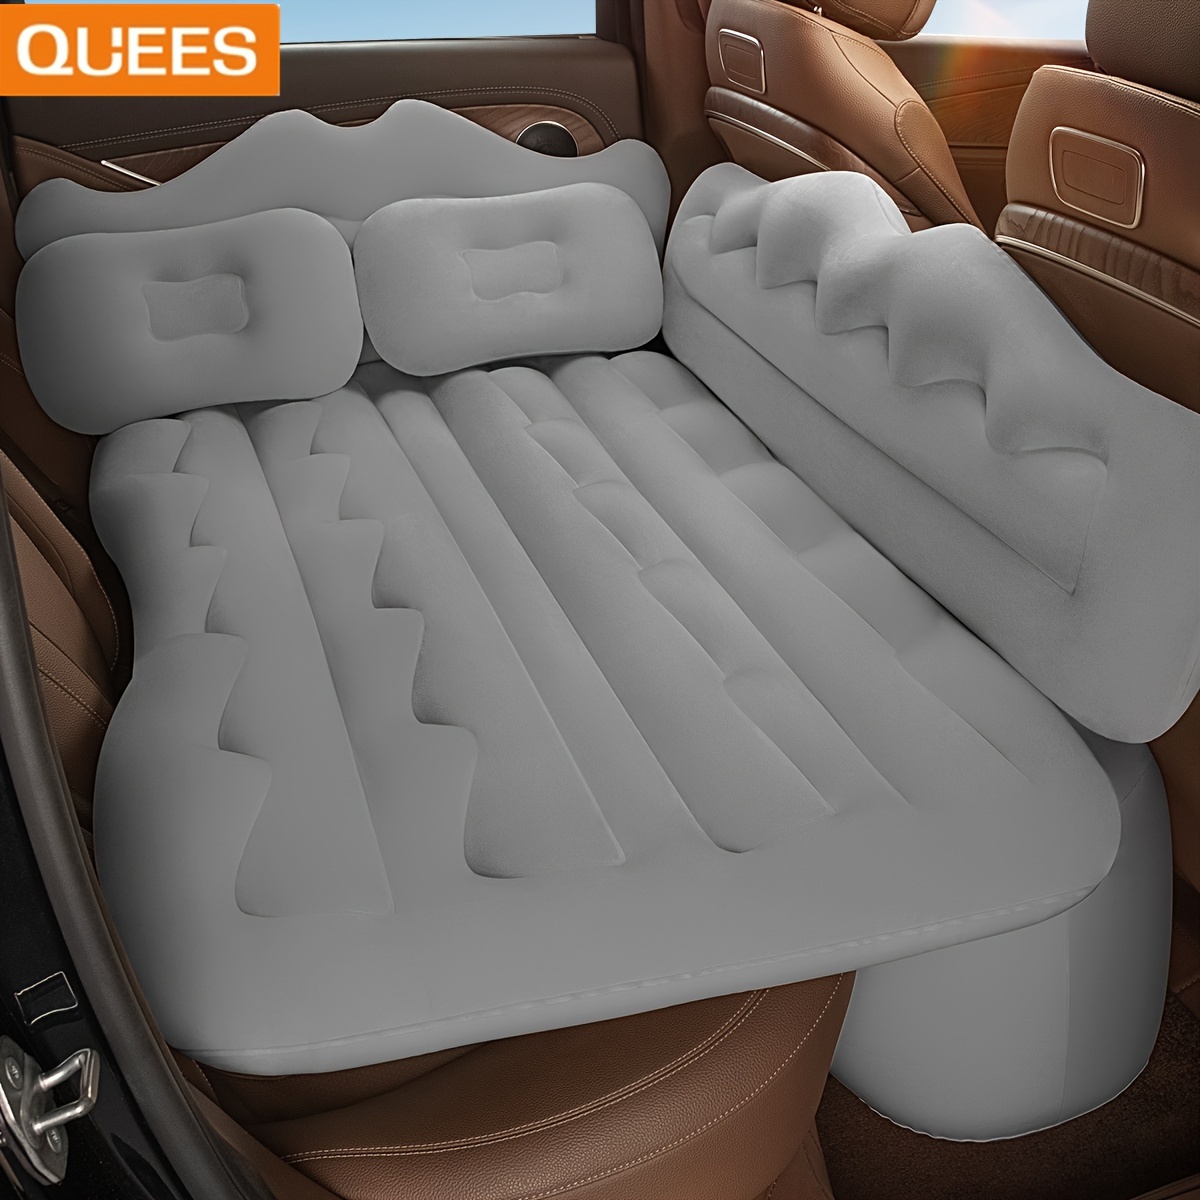 

Quees Inflatable Air Mattress With Sides For Car, Portable Travel Camping Mattress